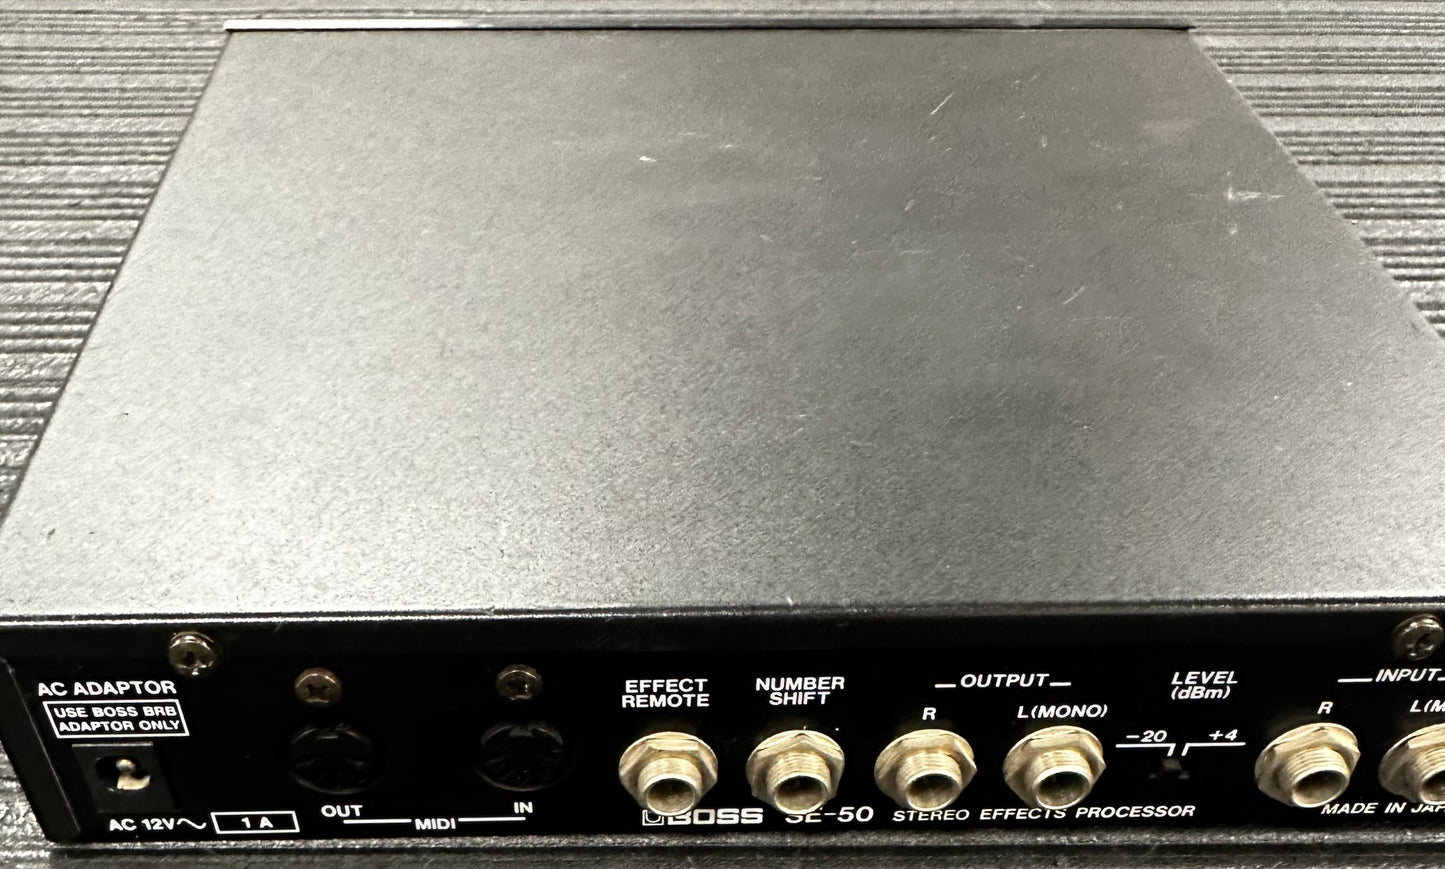 Back angle of Used 1990's Boss SE-50 Stereo Effects Processor TSS2841.